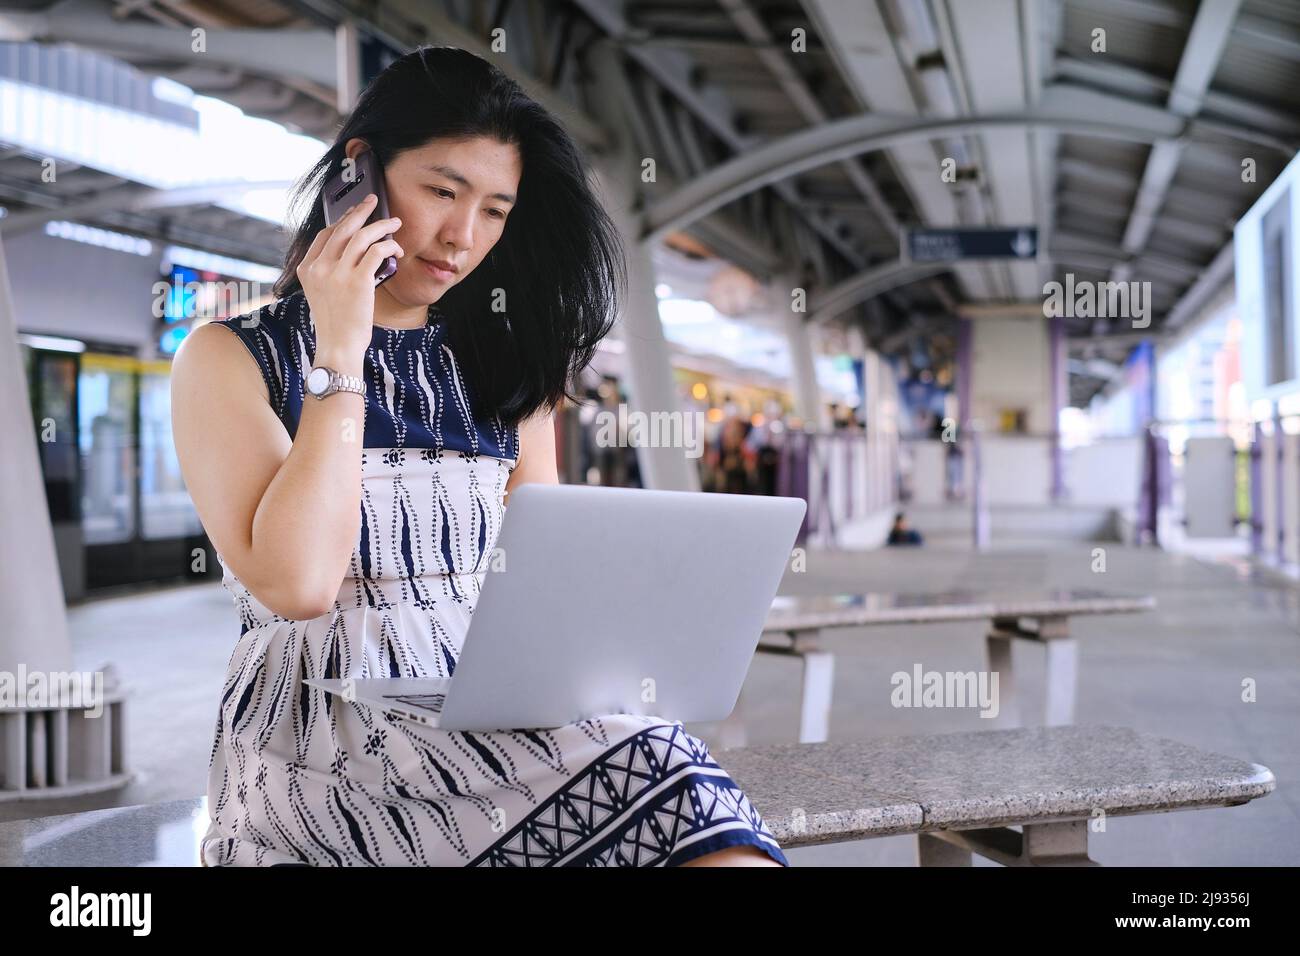 A young business woman is sitting on a bench at a train station or terminal, busy working on her computer and talking on her mobile phone at the same Stock Photo